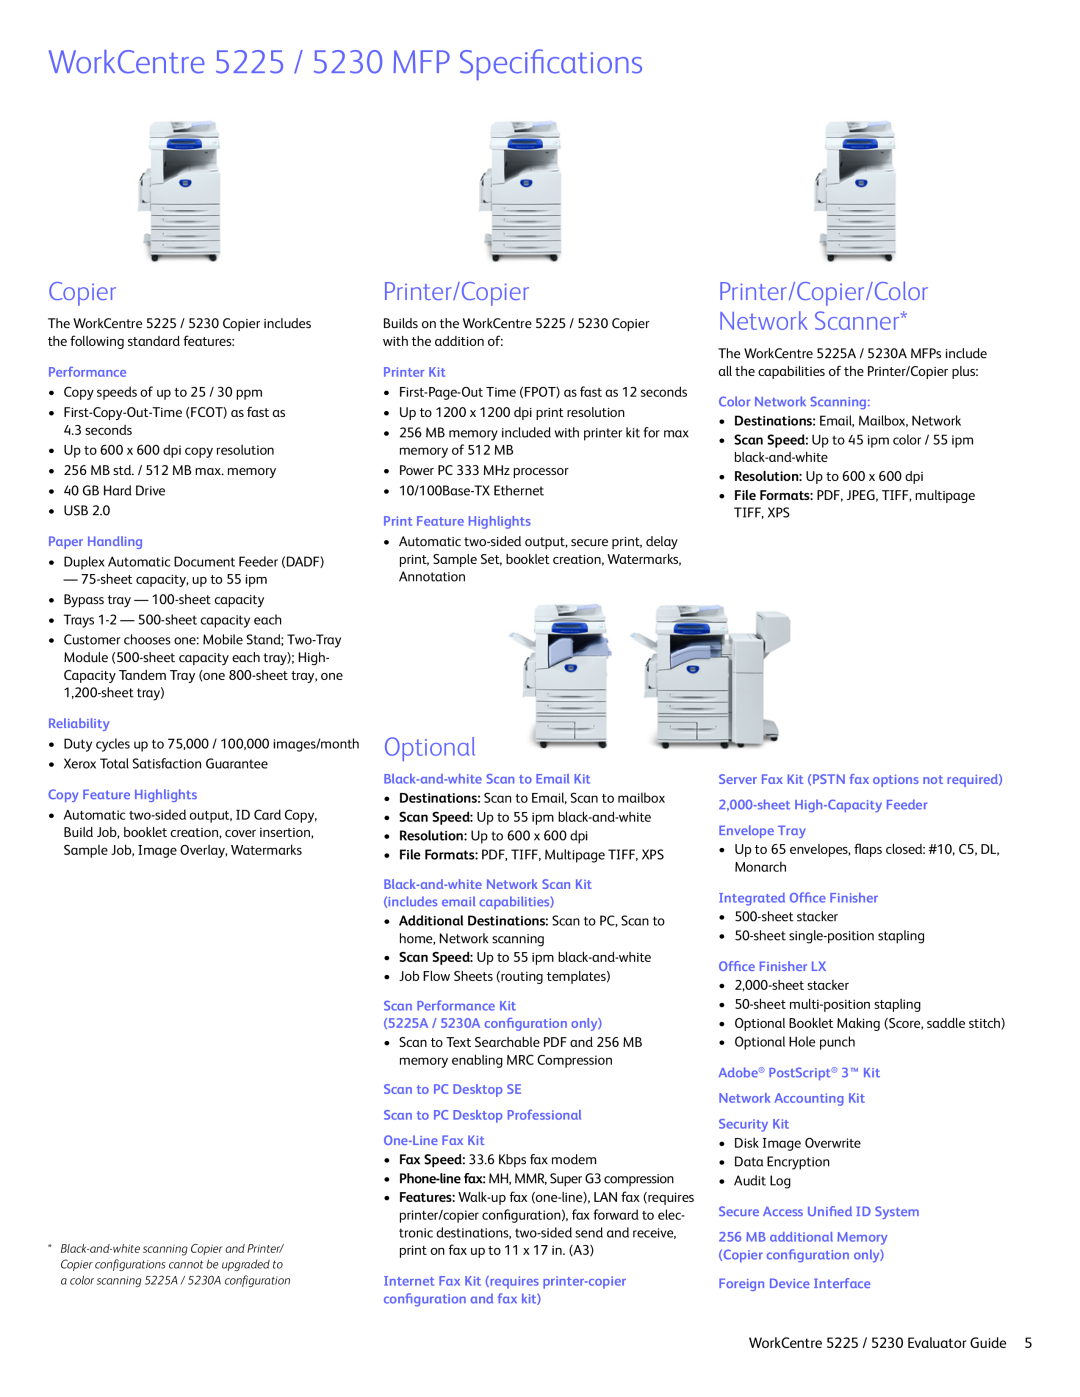 Xerox manual WorkCentre 5225 / 5230 MFP Specifications, Optional, Printer/Copier/Color Network Scanner 